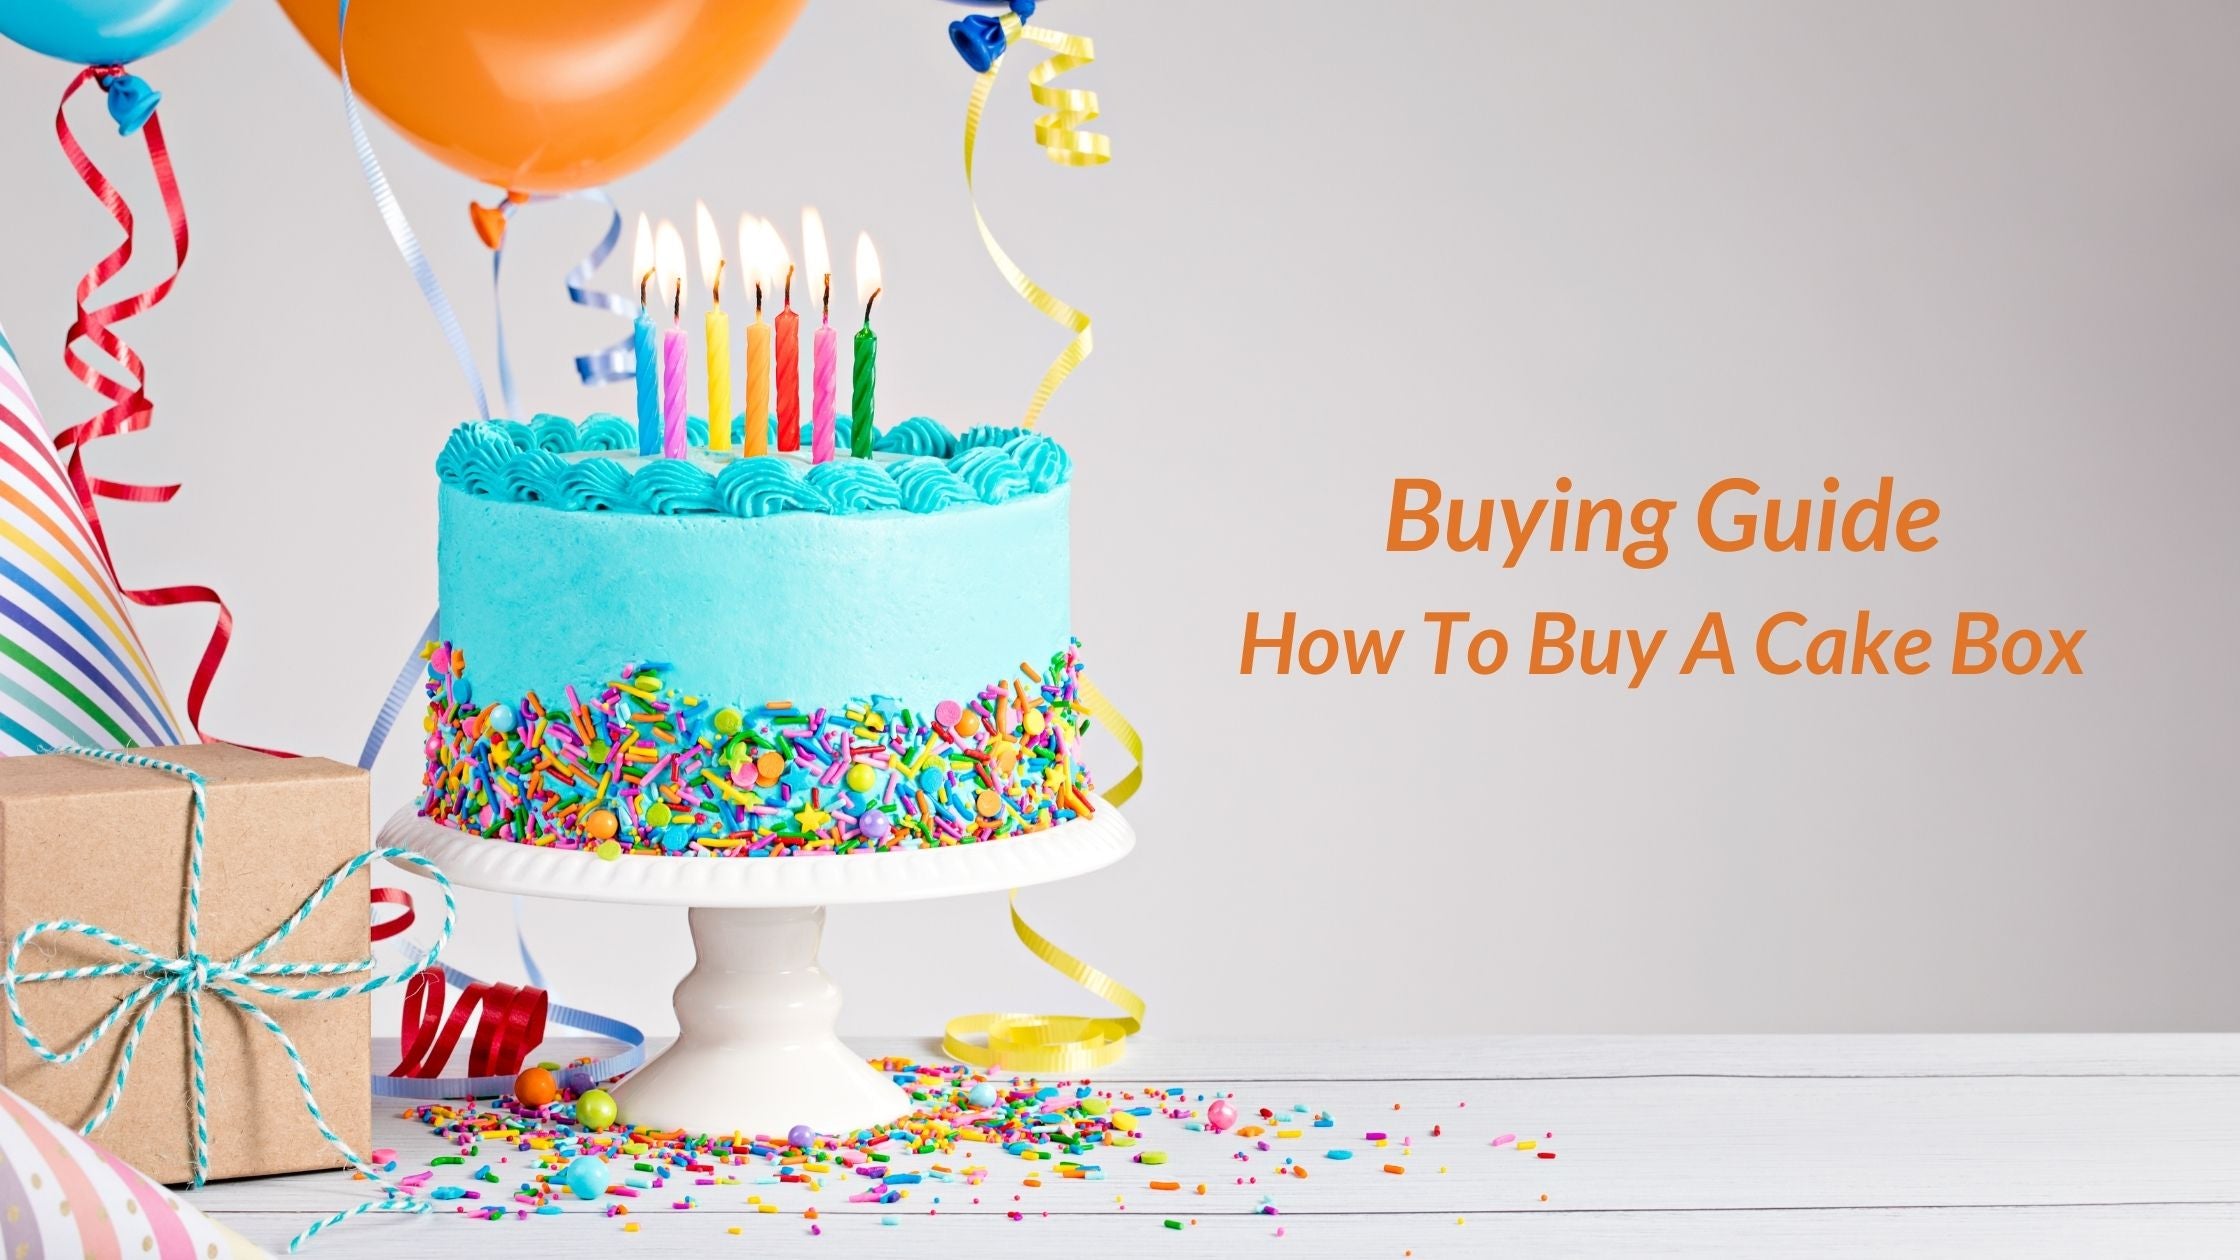 Buying Guide: How To Buy A Cake Box